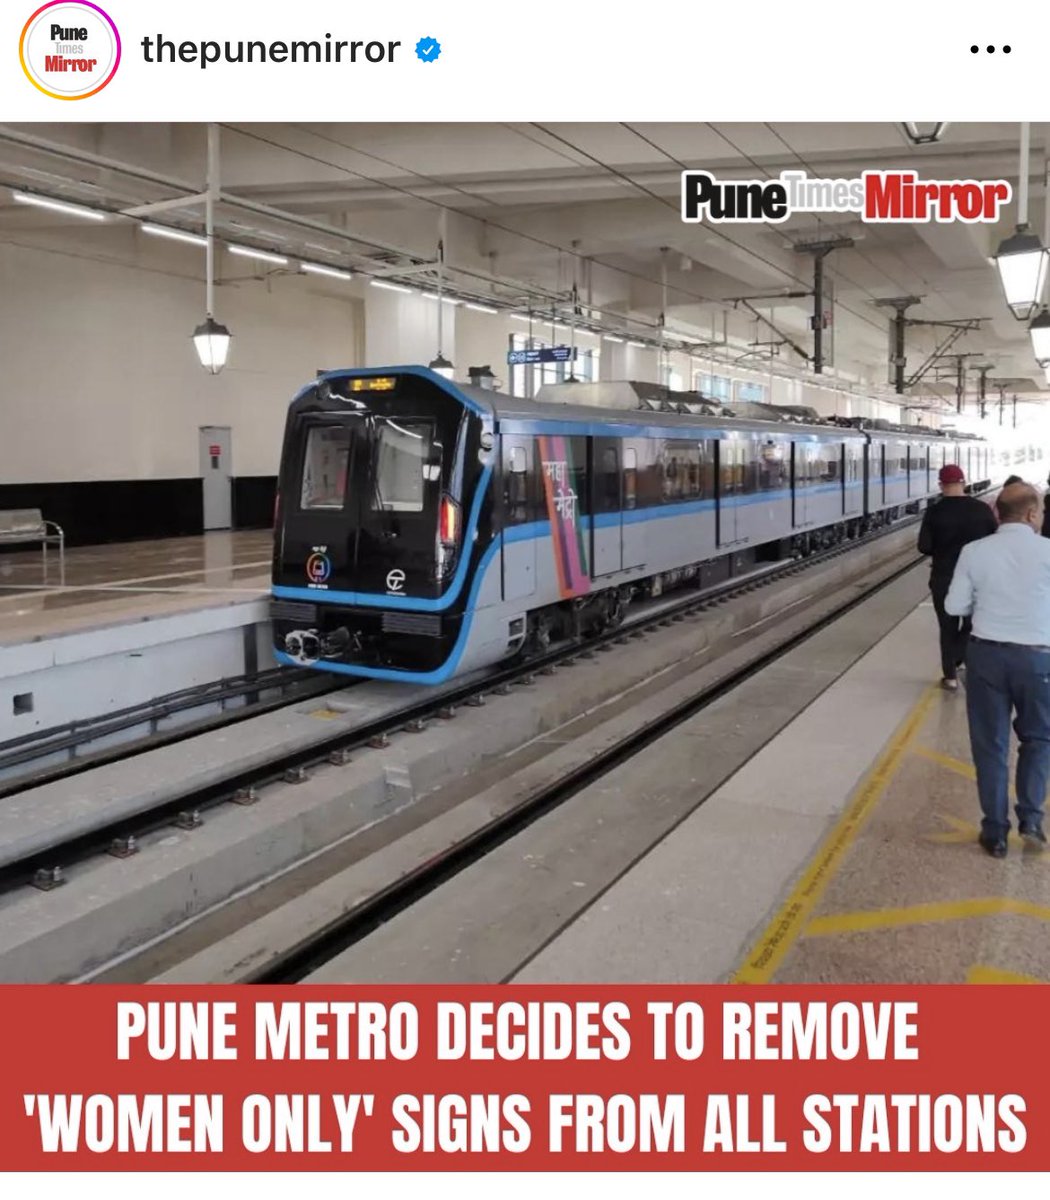 Yes their should not be any discrimination based on gender as per the constitution 😀#punemetro well done 👍 @realsiff @rajeevmysore